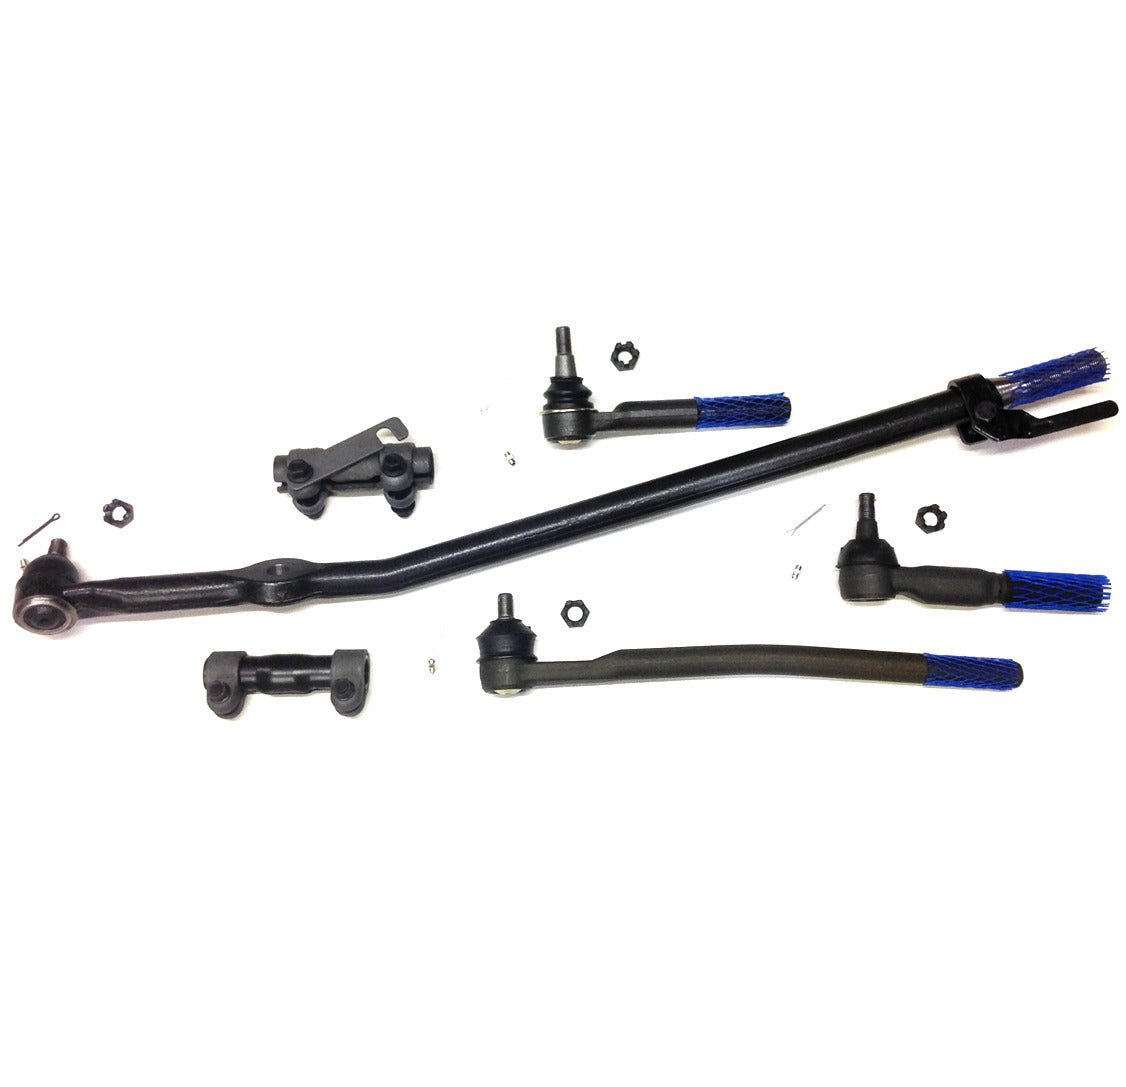 XRF Steering Kit Drag Link Tie Rod Sleeve Kit for 1999-2004 Ford F250, F350 Super Duty 2WD